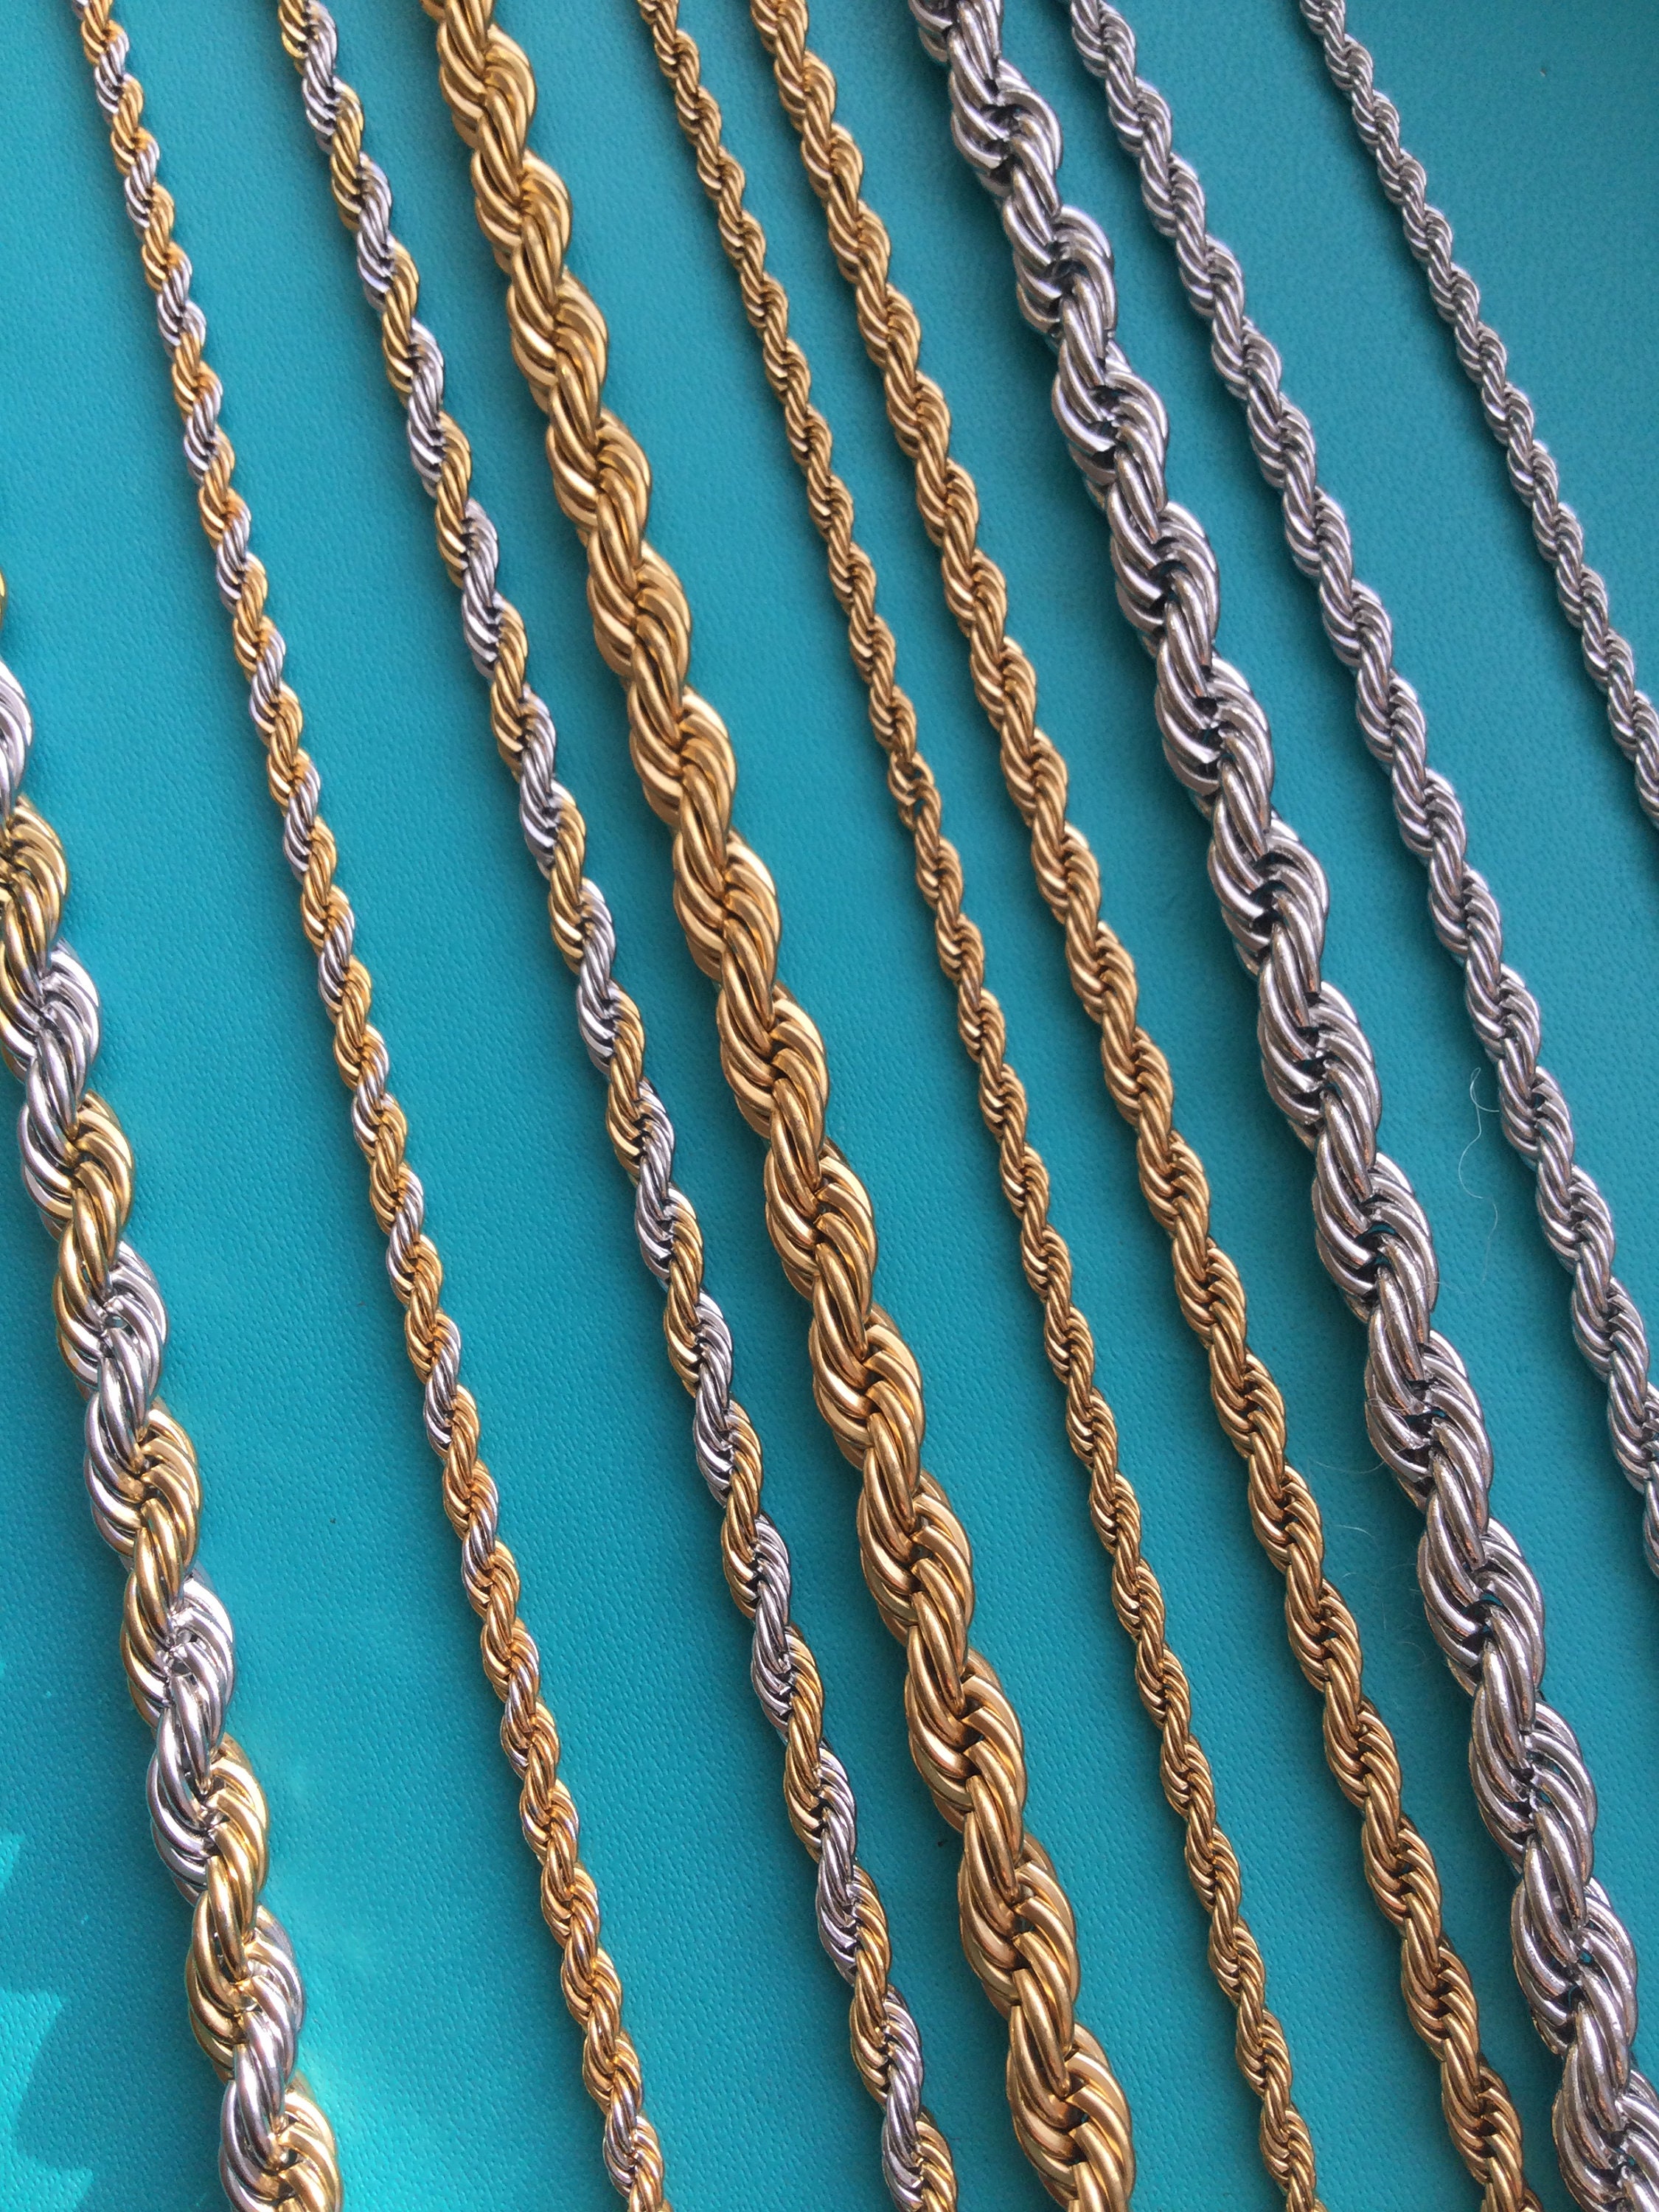 Gold Rope Necklace, Gold Rope Chain, Gold Chain Necklace, Rope Chain  Necklace, Chunky Gold Necklace, Thick Rope Chain Gold Necklace 